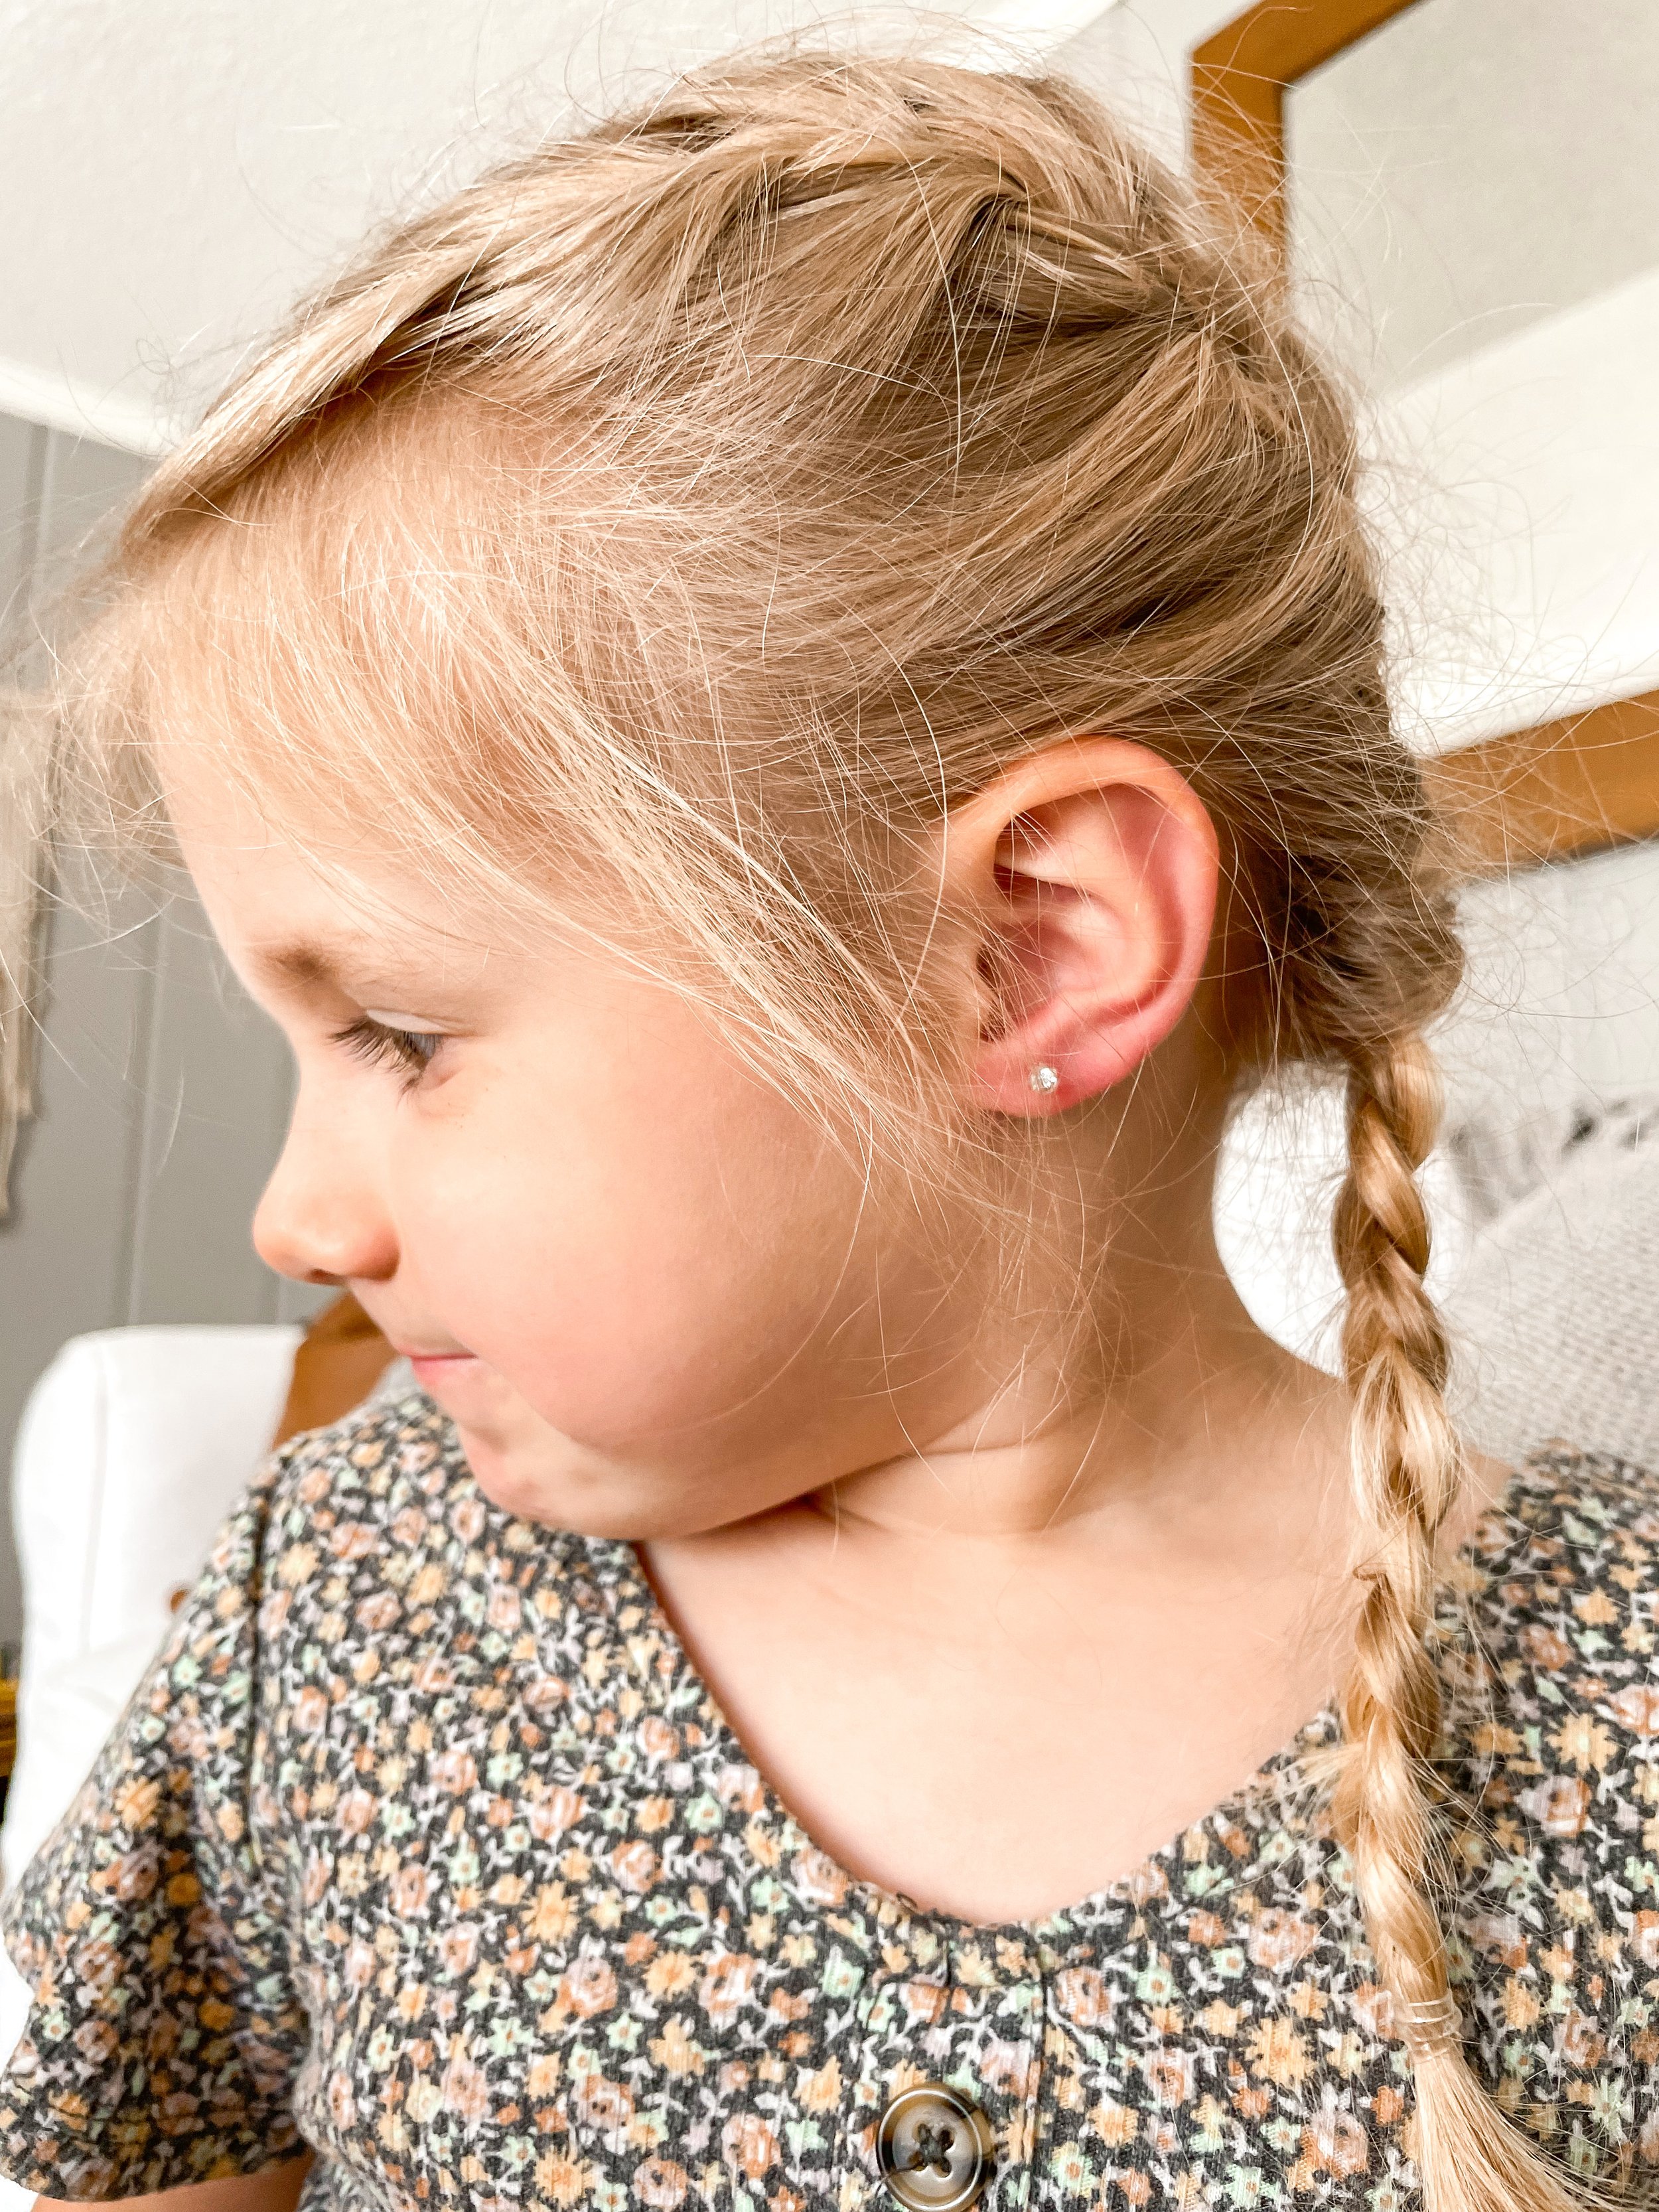 Children's Ear Piercings, What's the Best Option? — Value Minded Mama